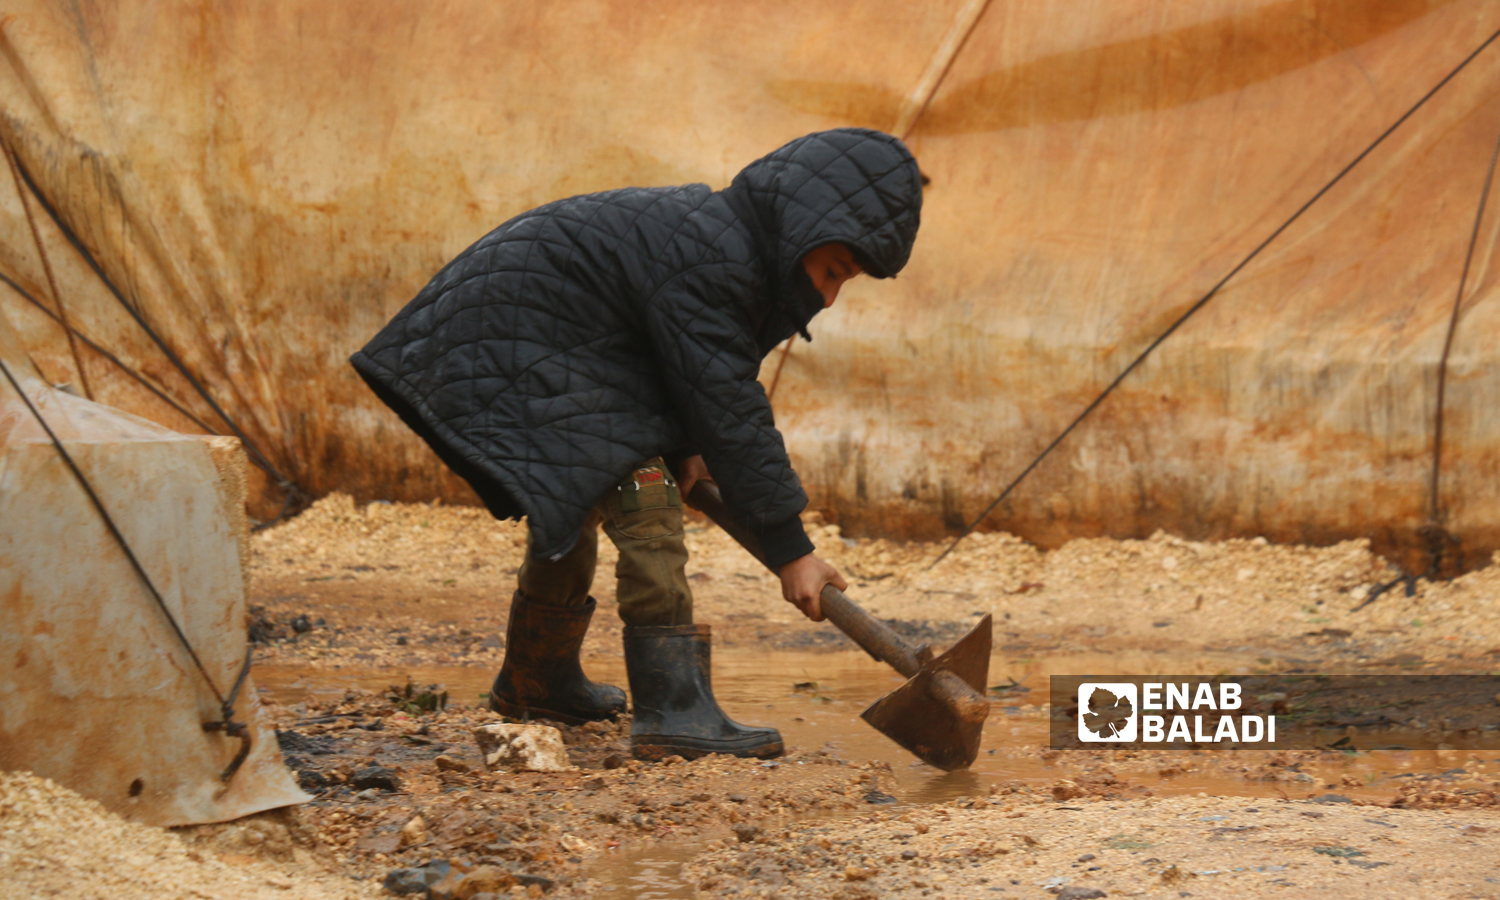 A Syrian displaced child digging a rainwater drain in one of the camps of Idlib countryside - December 2021 (Enab Baladi/Iyad Abdul Jawad)